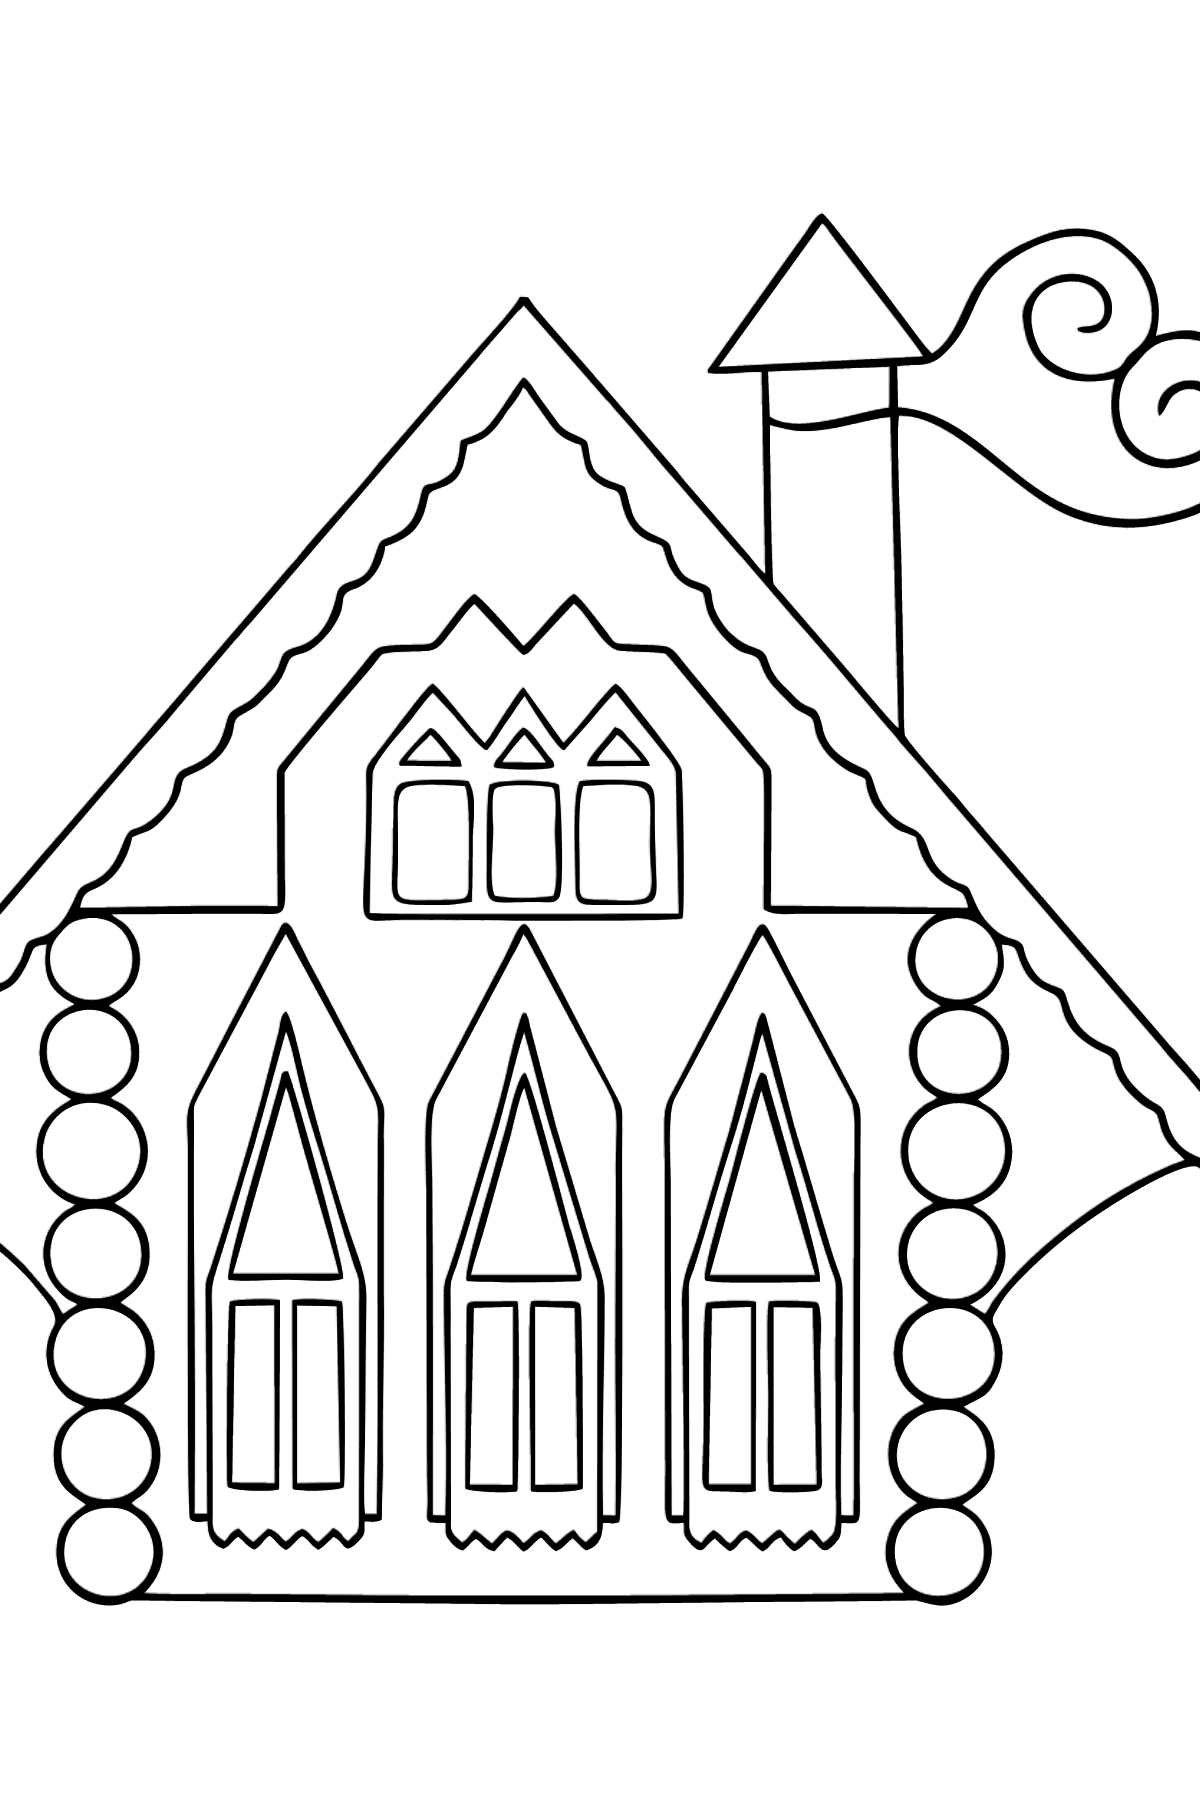 Rainbow House Coloring Page (Easy) - Coloring Pages for Kids